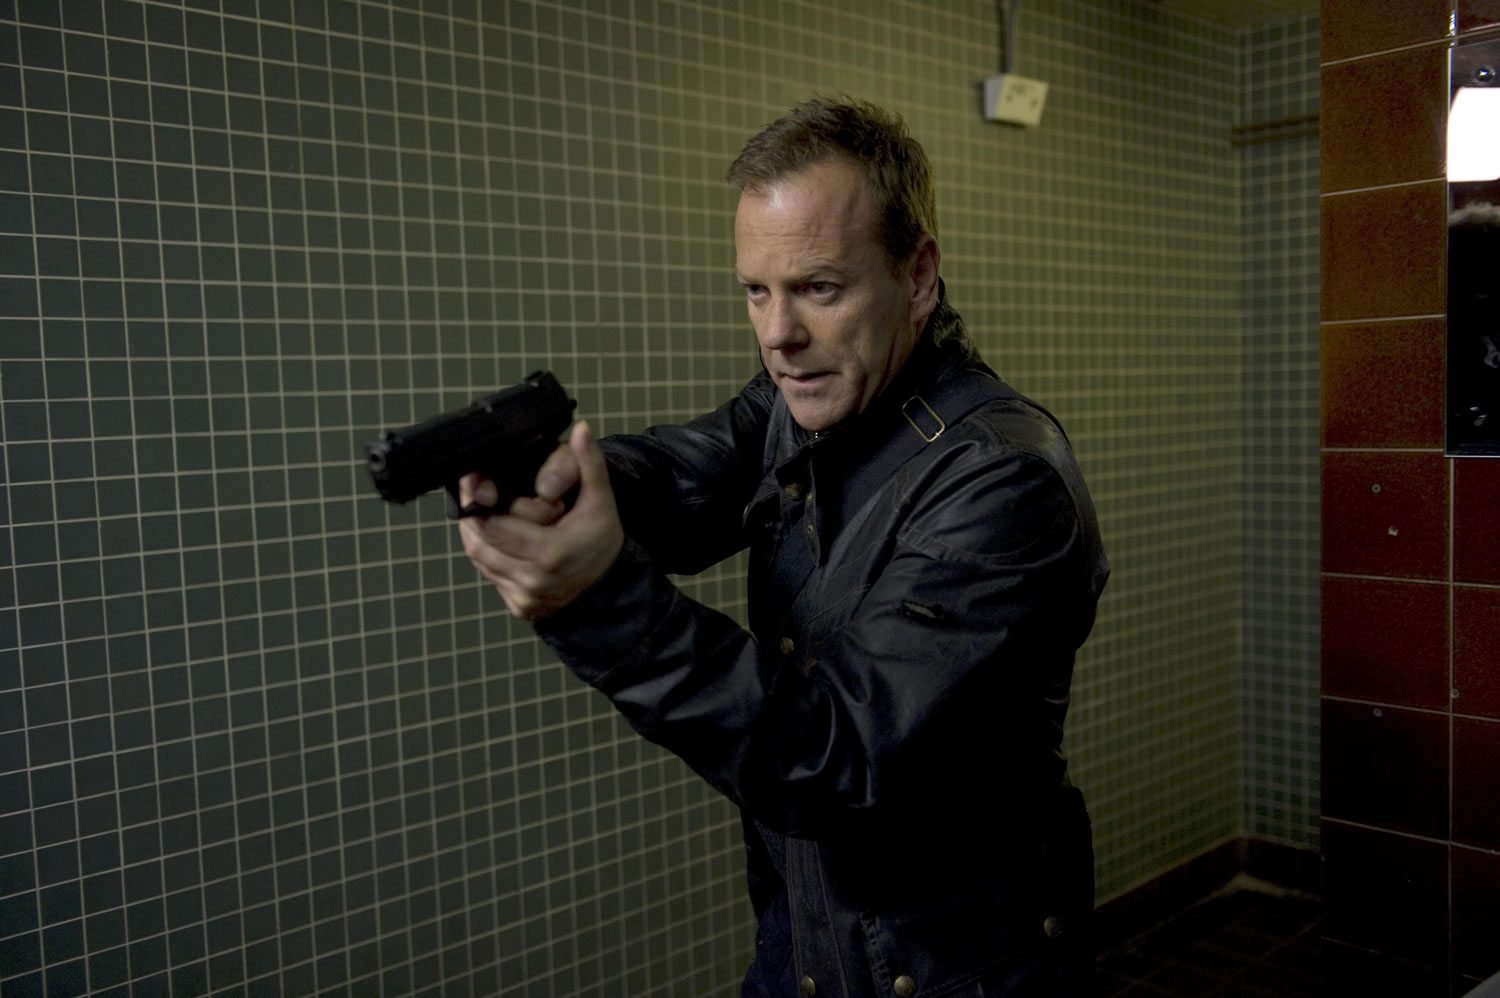 Fox
Kiefer Sutherland returns as Jack Bauer in &quot;24: Live Another Day,&quot; premiering Monday at 8 p.m. on Fox.